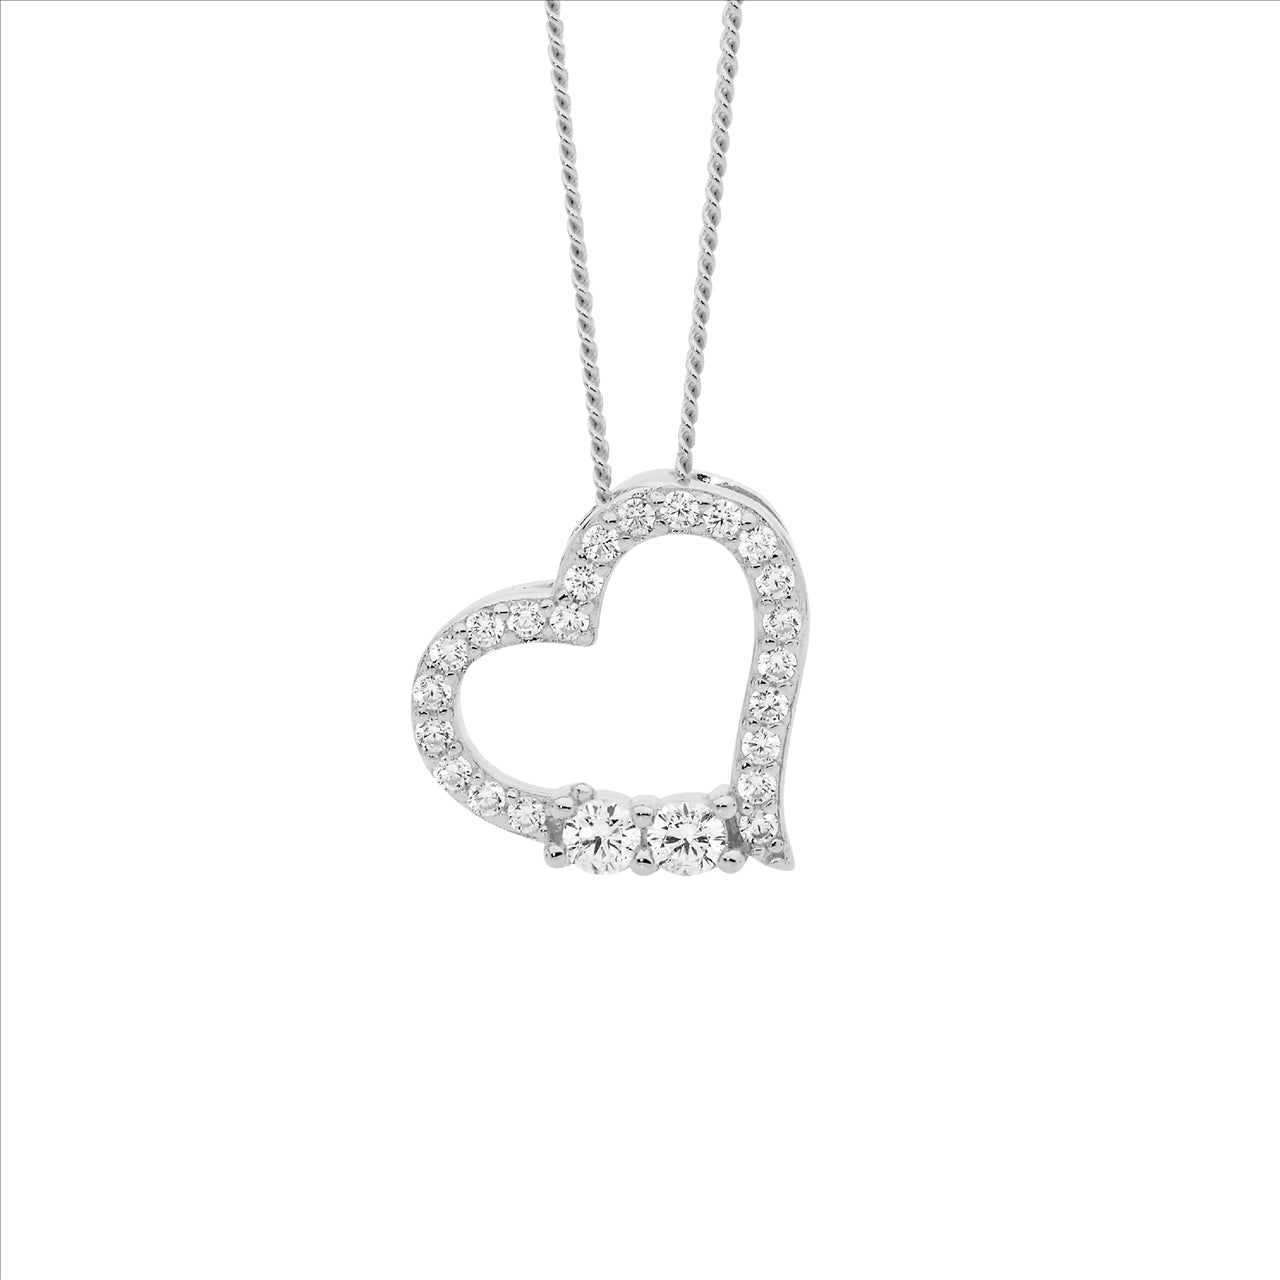 Silver Open Heart Necklace with Cubic Zirconia